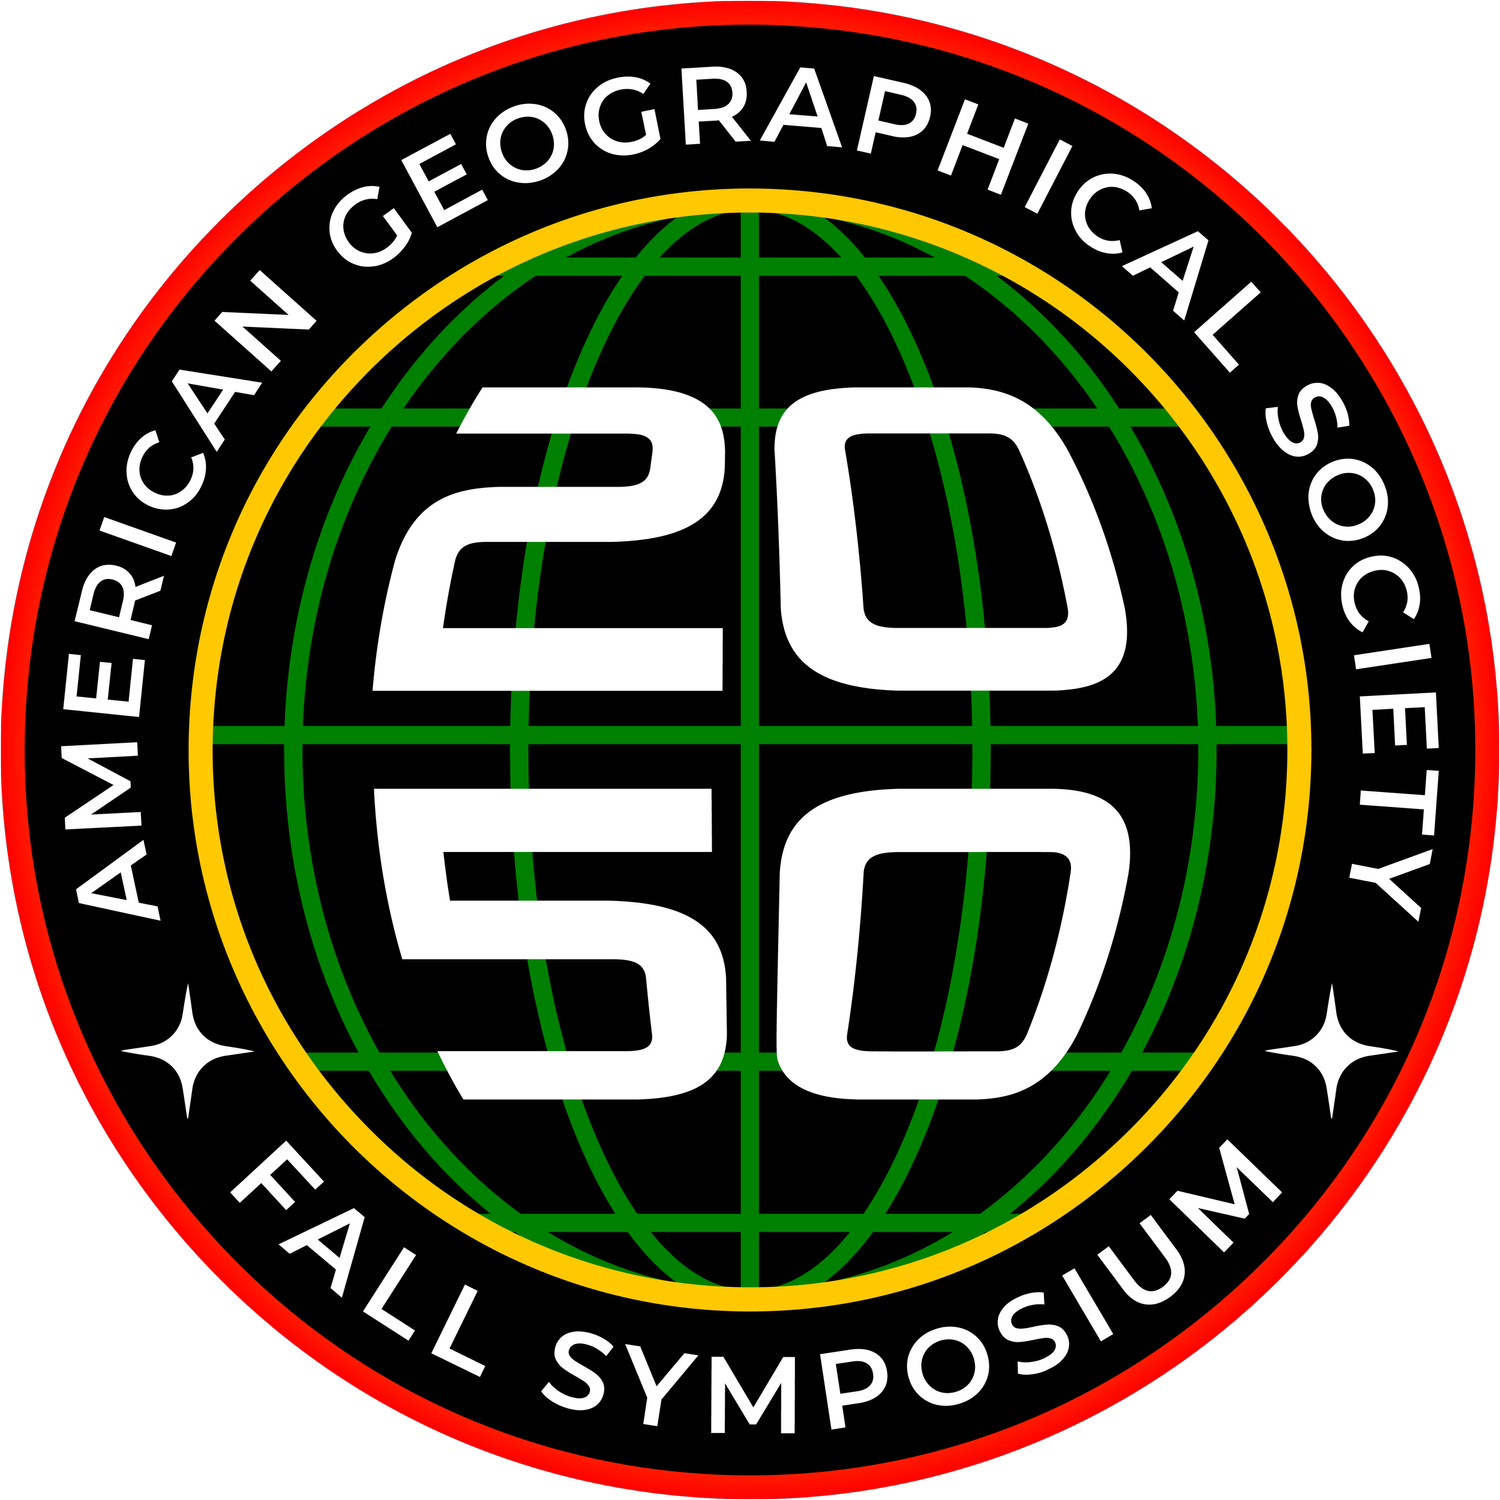 Geography 2050